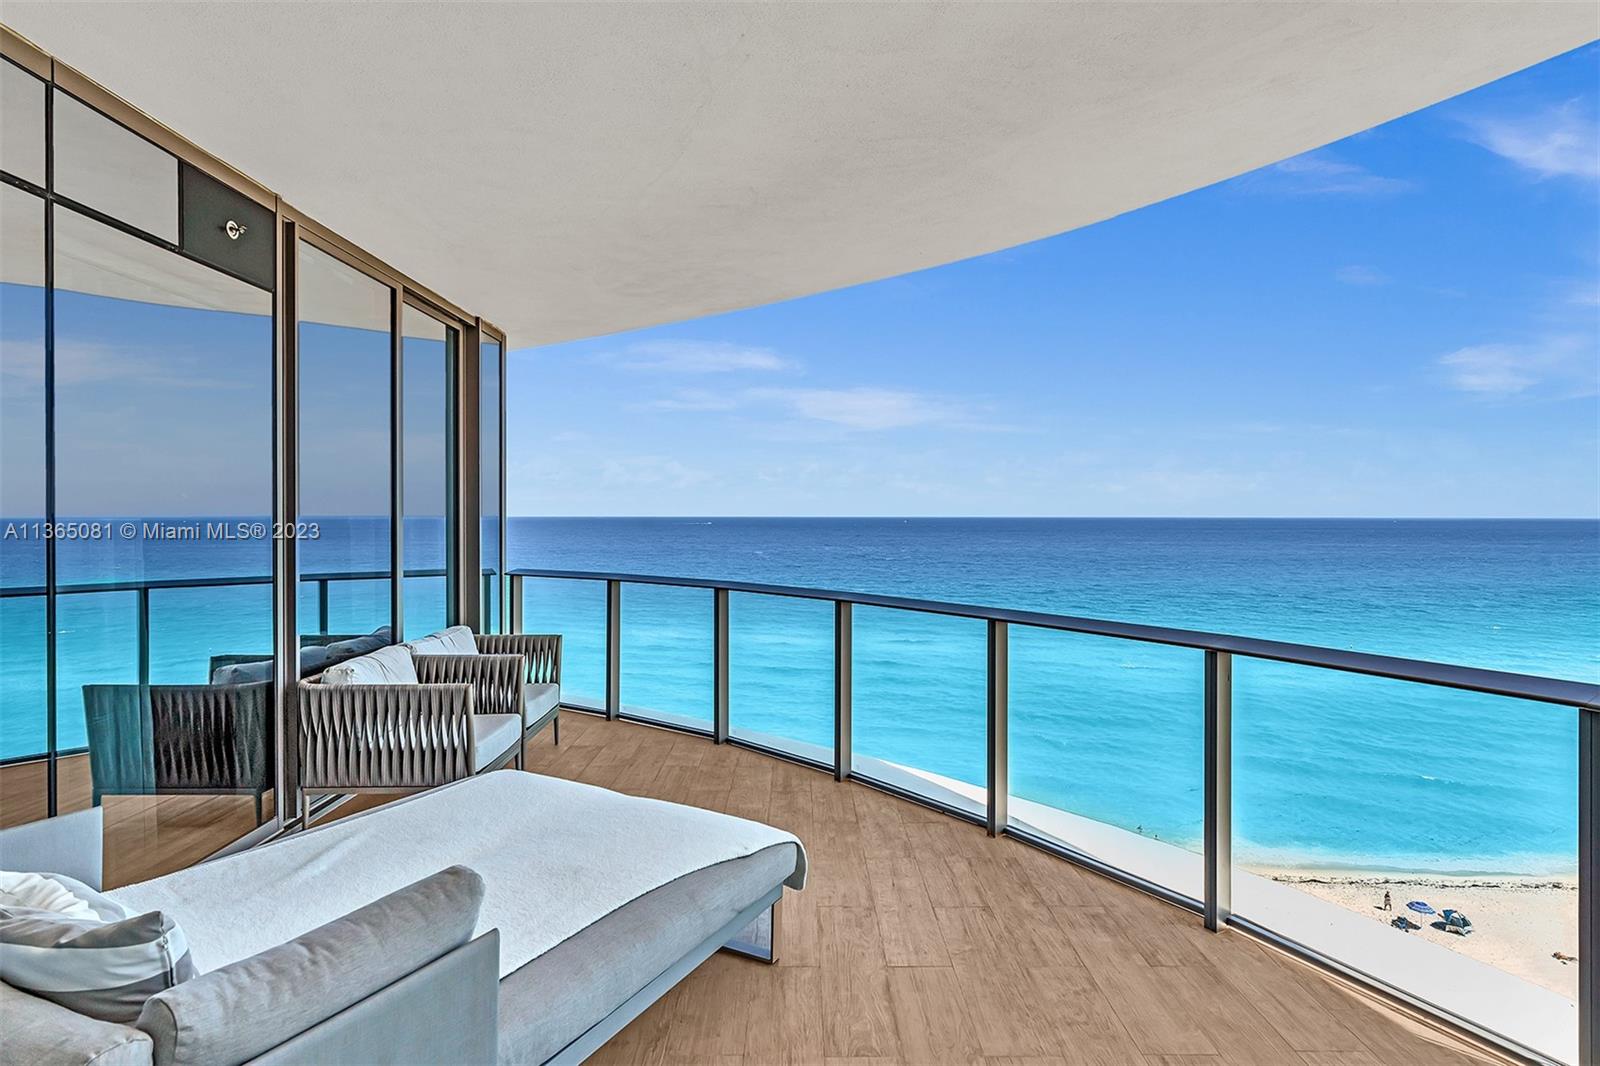 The Best Apartment in the Most Prestigious Line, in the most Luxurious Building in the USA!!!  ~300° unobstructed views including the Atlantic Ocean, Intracoastal, Bay, and Miami Skyline. the Perfect Floor to See, Hear, Feel and Smell the Beautiful Ocean and in Ritz Carlton Sunny Isles Beach!  This is the largest Layout in the building with Beautiful Panoramic views of the ocean, Bay, and Skyline from ALL balconies & Floor to Ceiling Windows throughout the Unit!  Private Elevator fully furnished.  Full Beach Service with two pools, restaurant, gym, spa, Pilates, sauna, and much more.  Once in a lifetime opportunity.  No expenses Spared.  Must See if Looking for the Creme de La Creme in South Florida, or anywhere in the USA. Sale Fully Furnished.